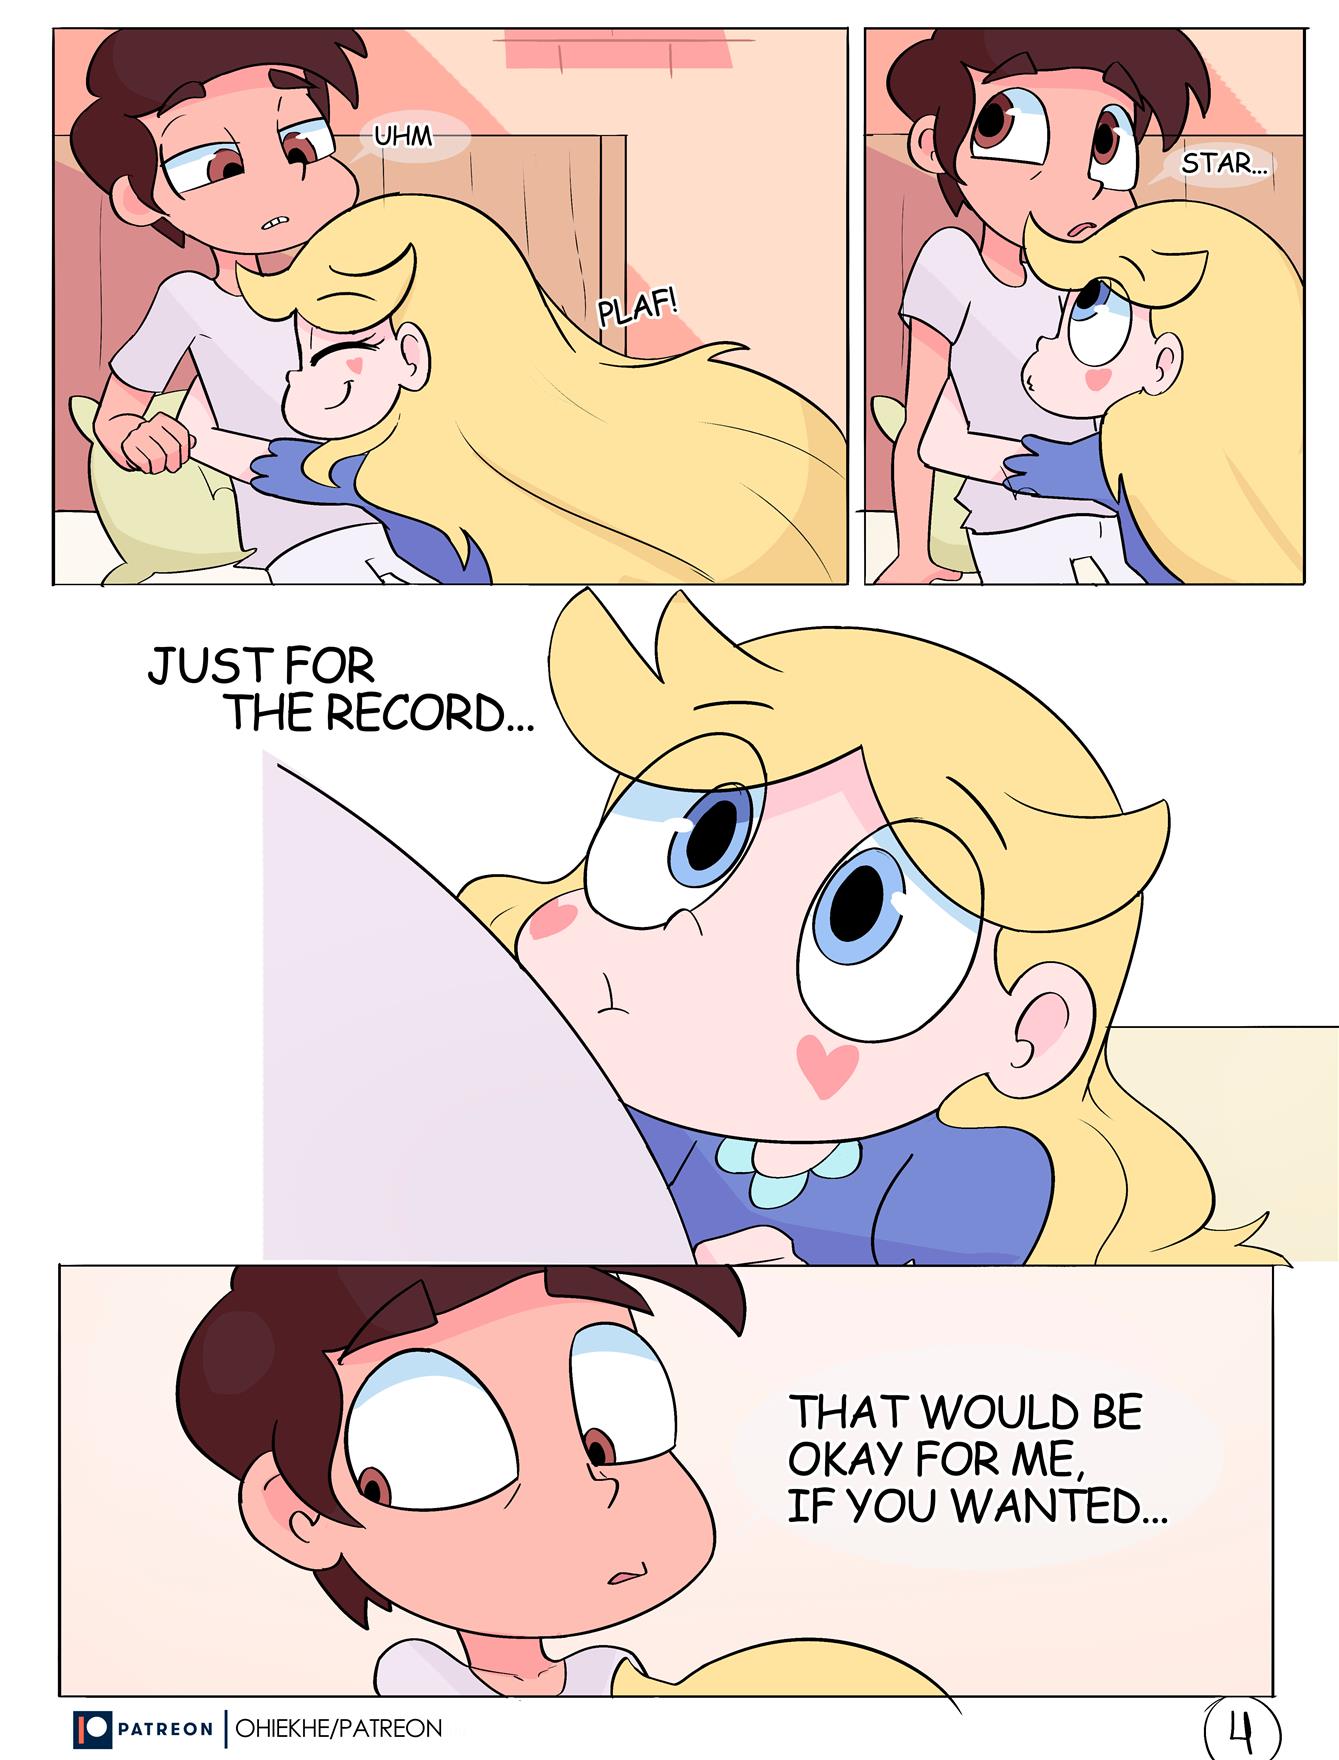 Time Alone (Star vs the Forces of Evil)